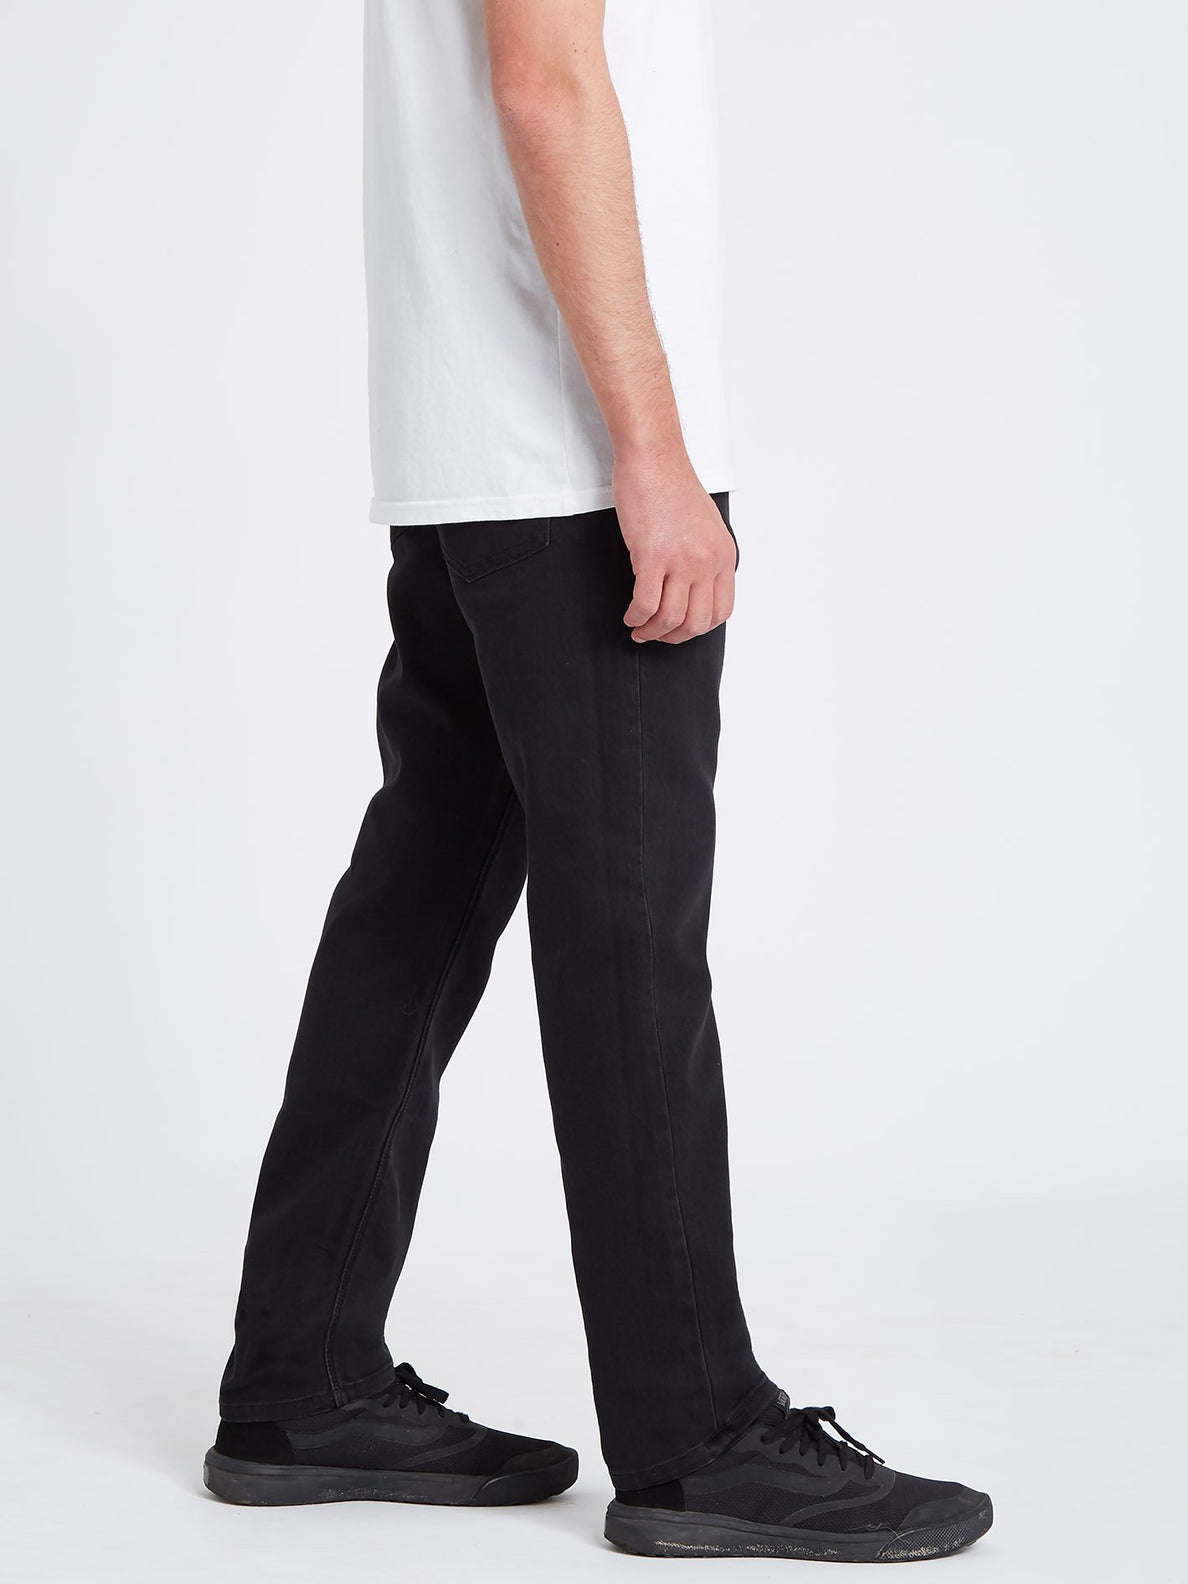 Jean Solver Tapered - Black Out